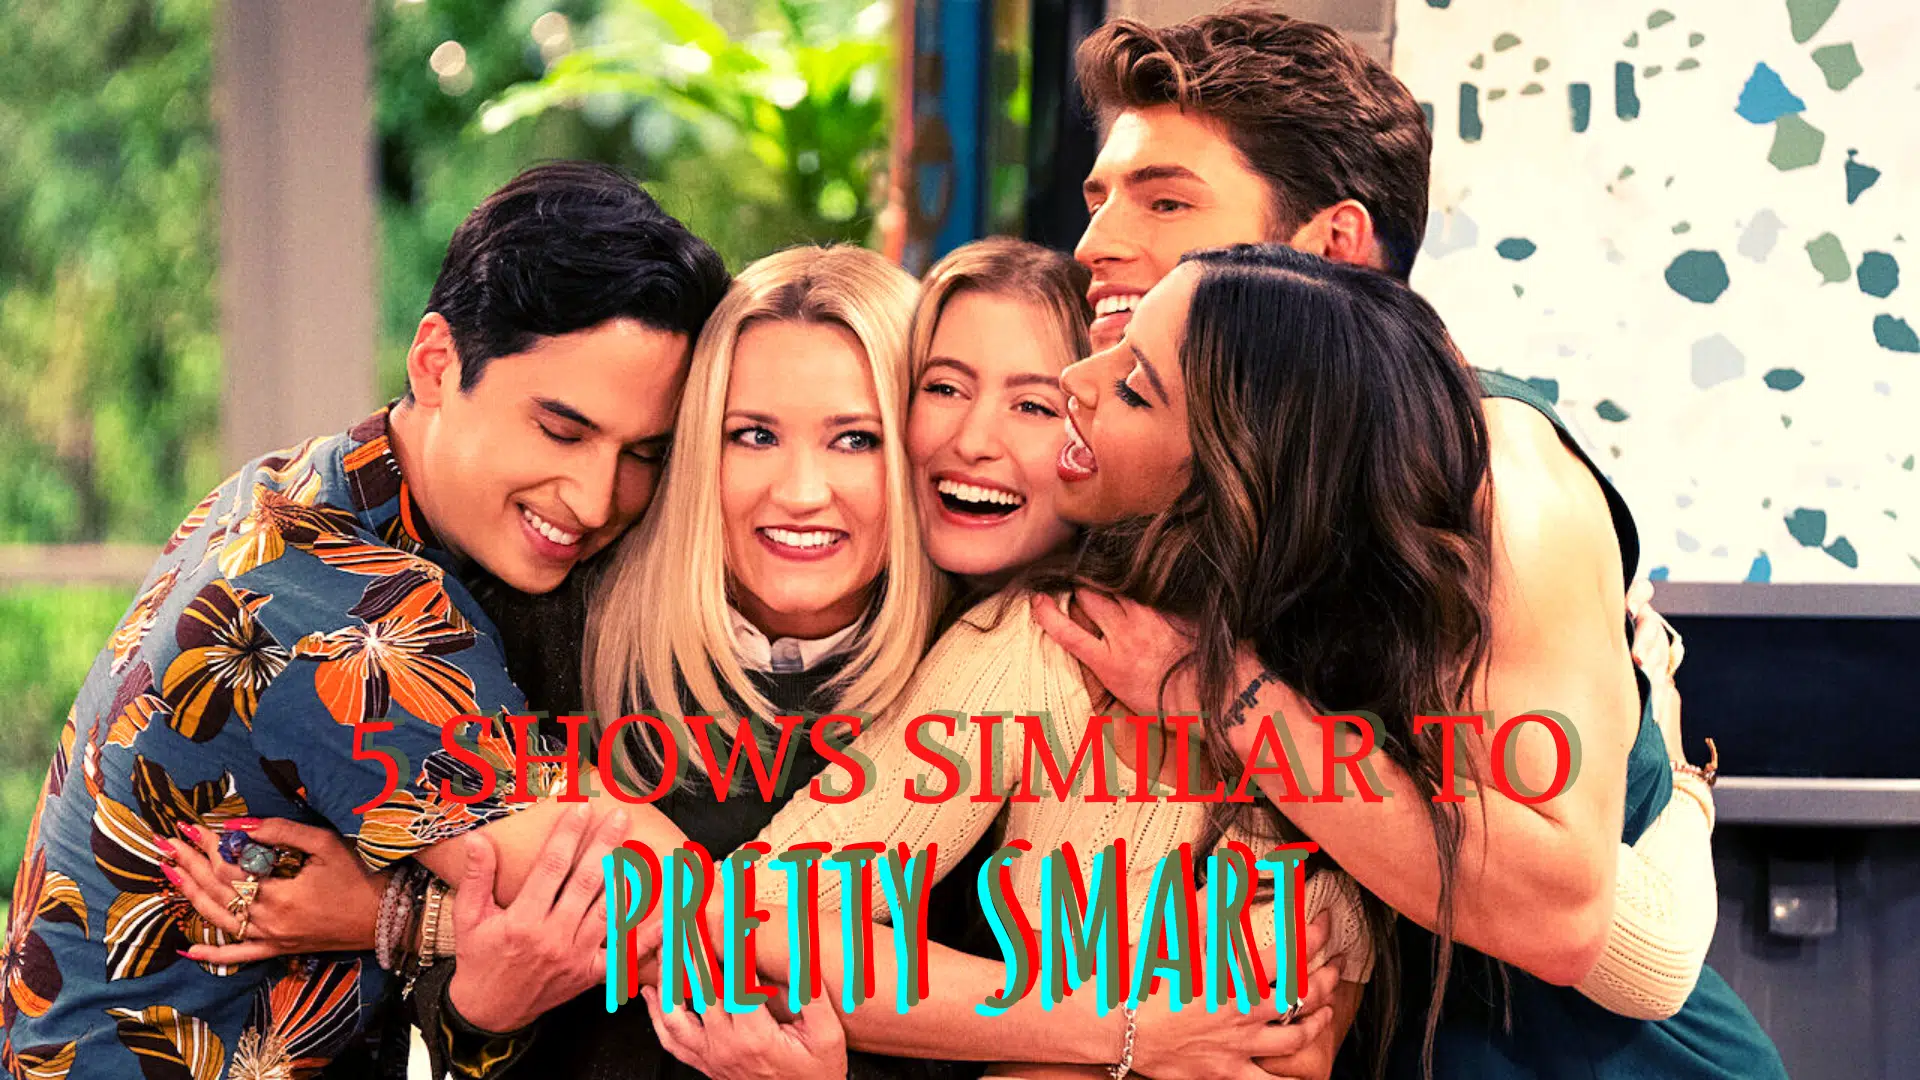 5 Shows Similar to Pretty Smart